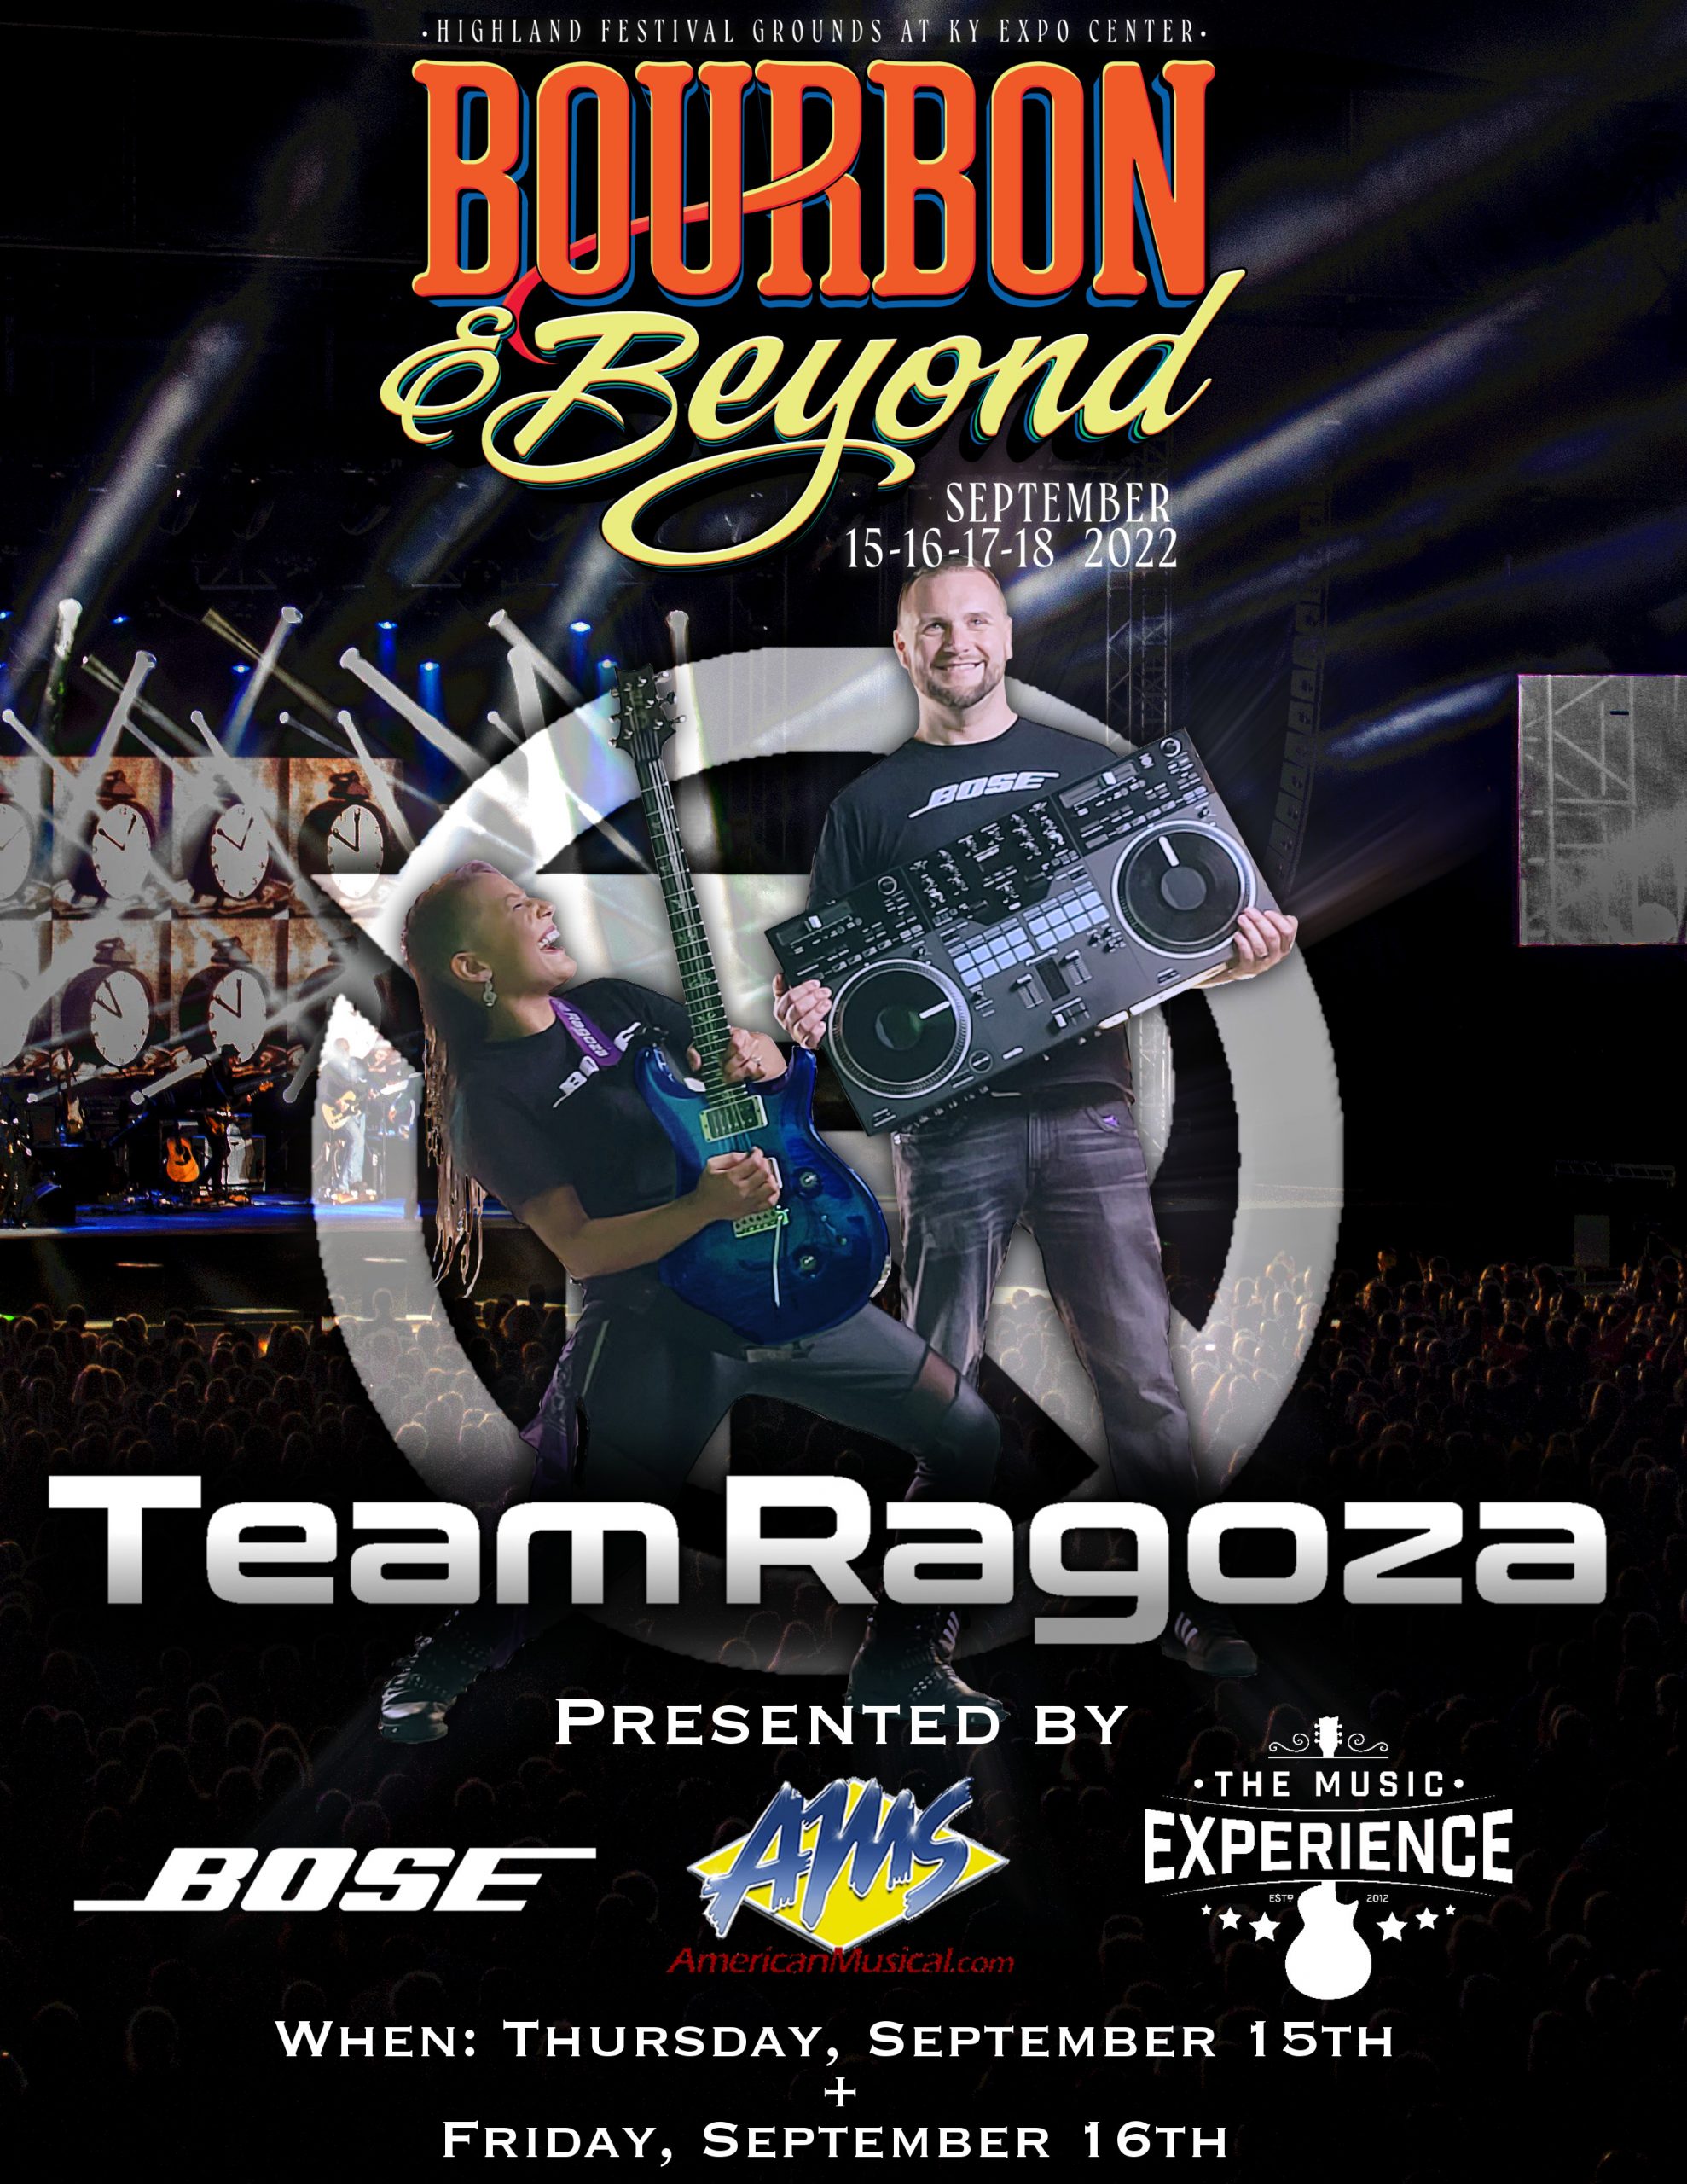 Team Ragoza - Live at the Bose/AMS/The Music Experience Booth